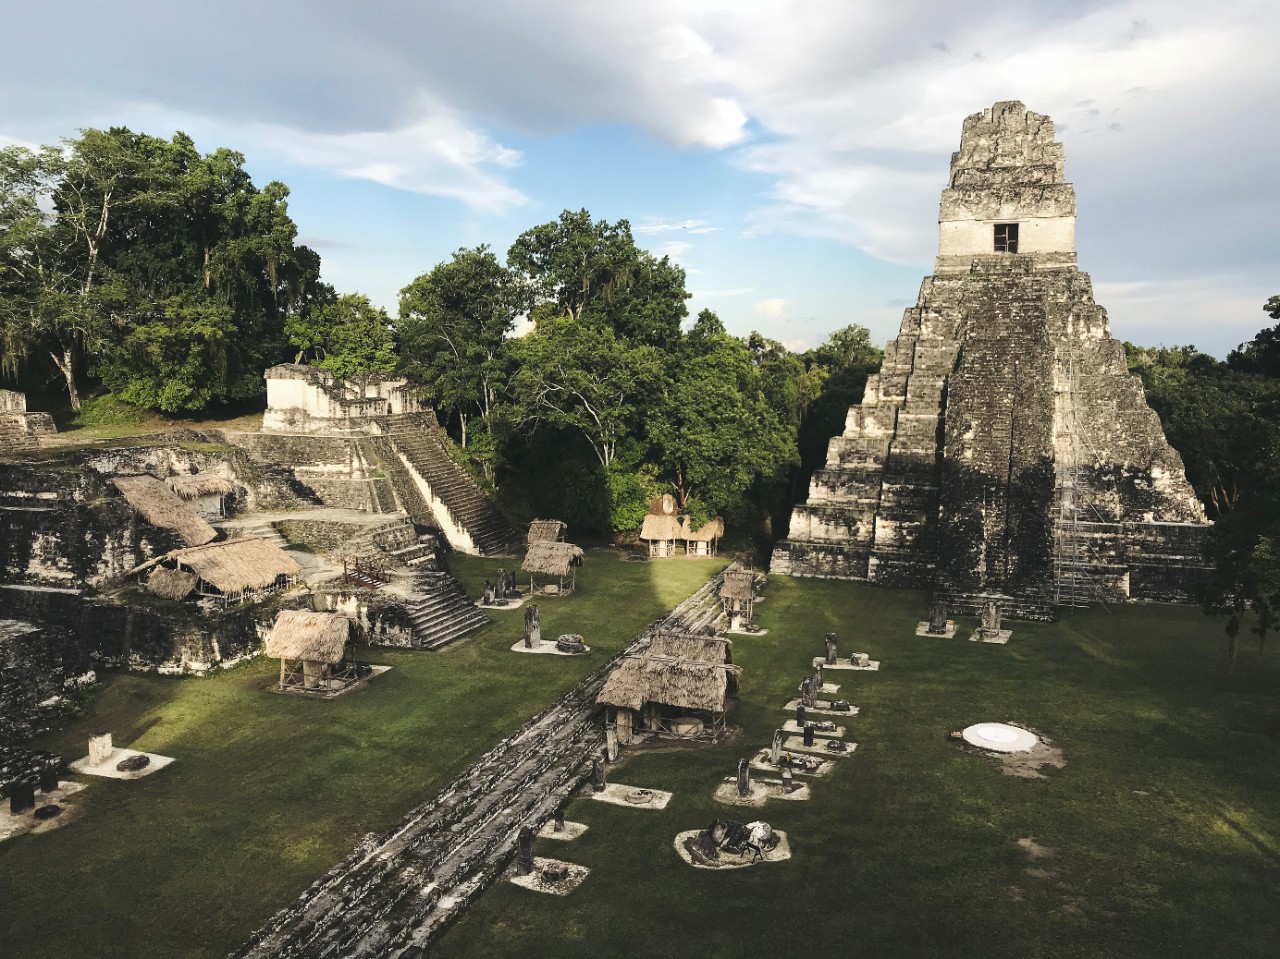 The pyramids of Tikal rise above the rainforest.